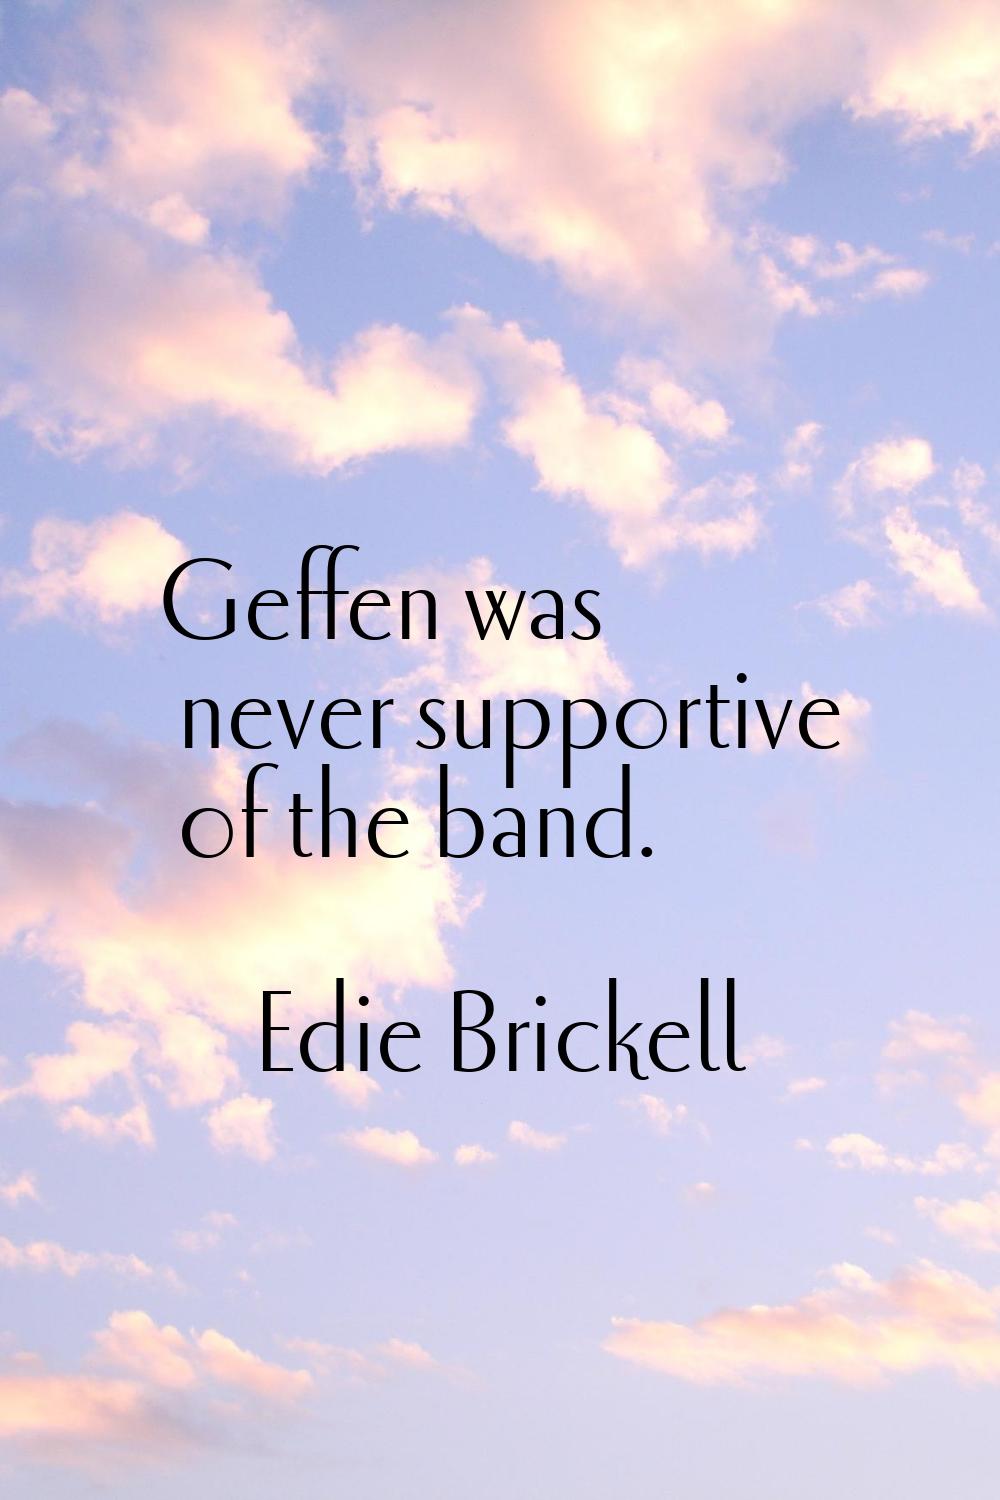 Geffen was never supportive of the band.